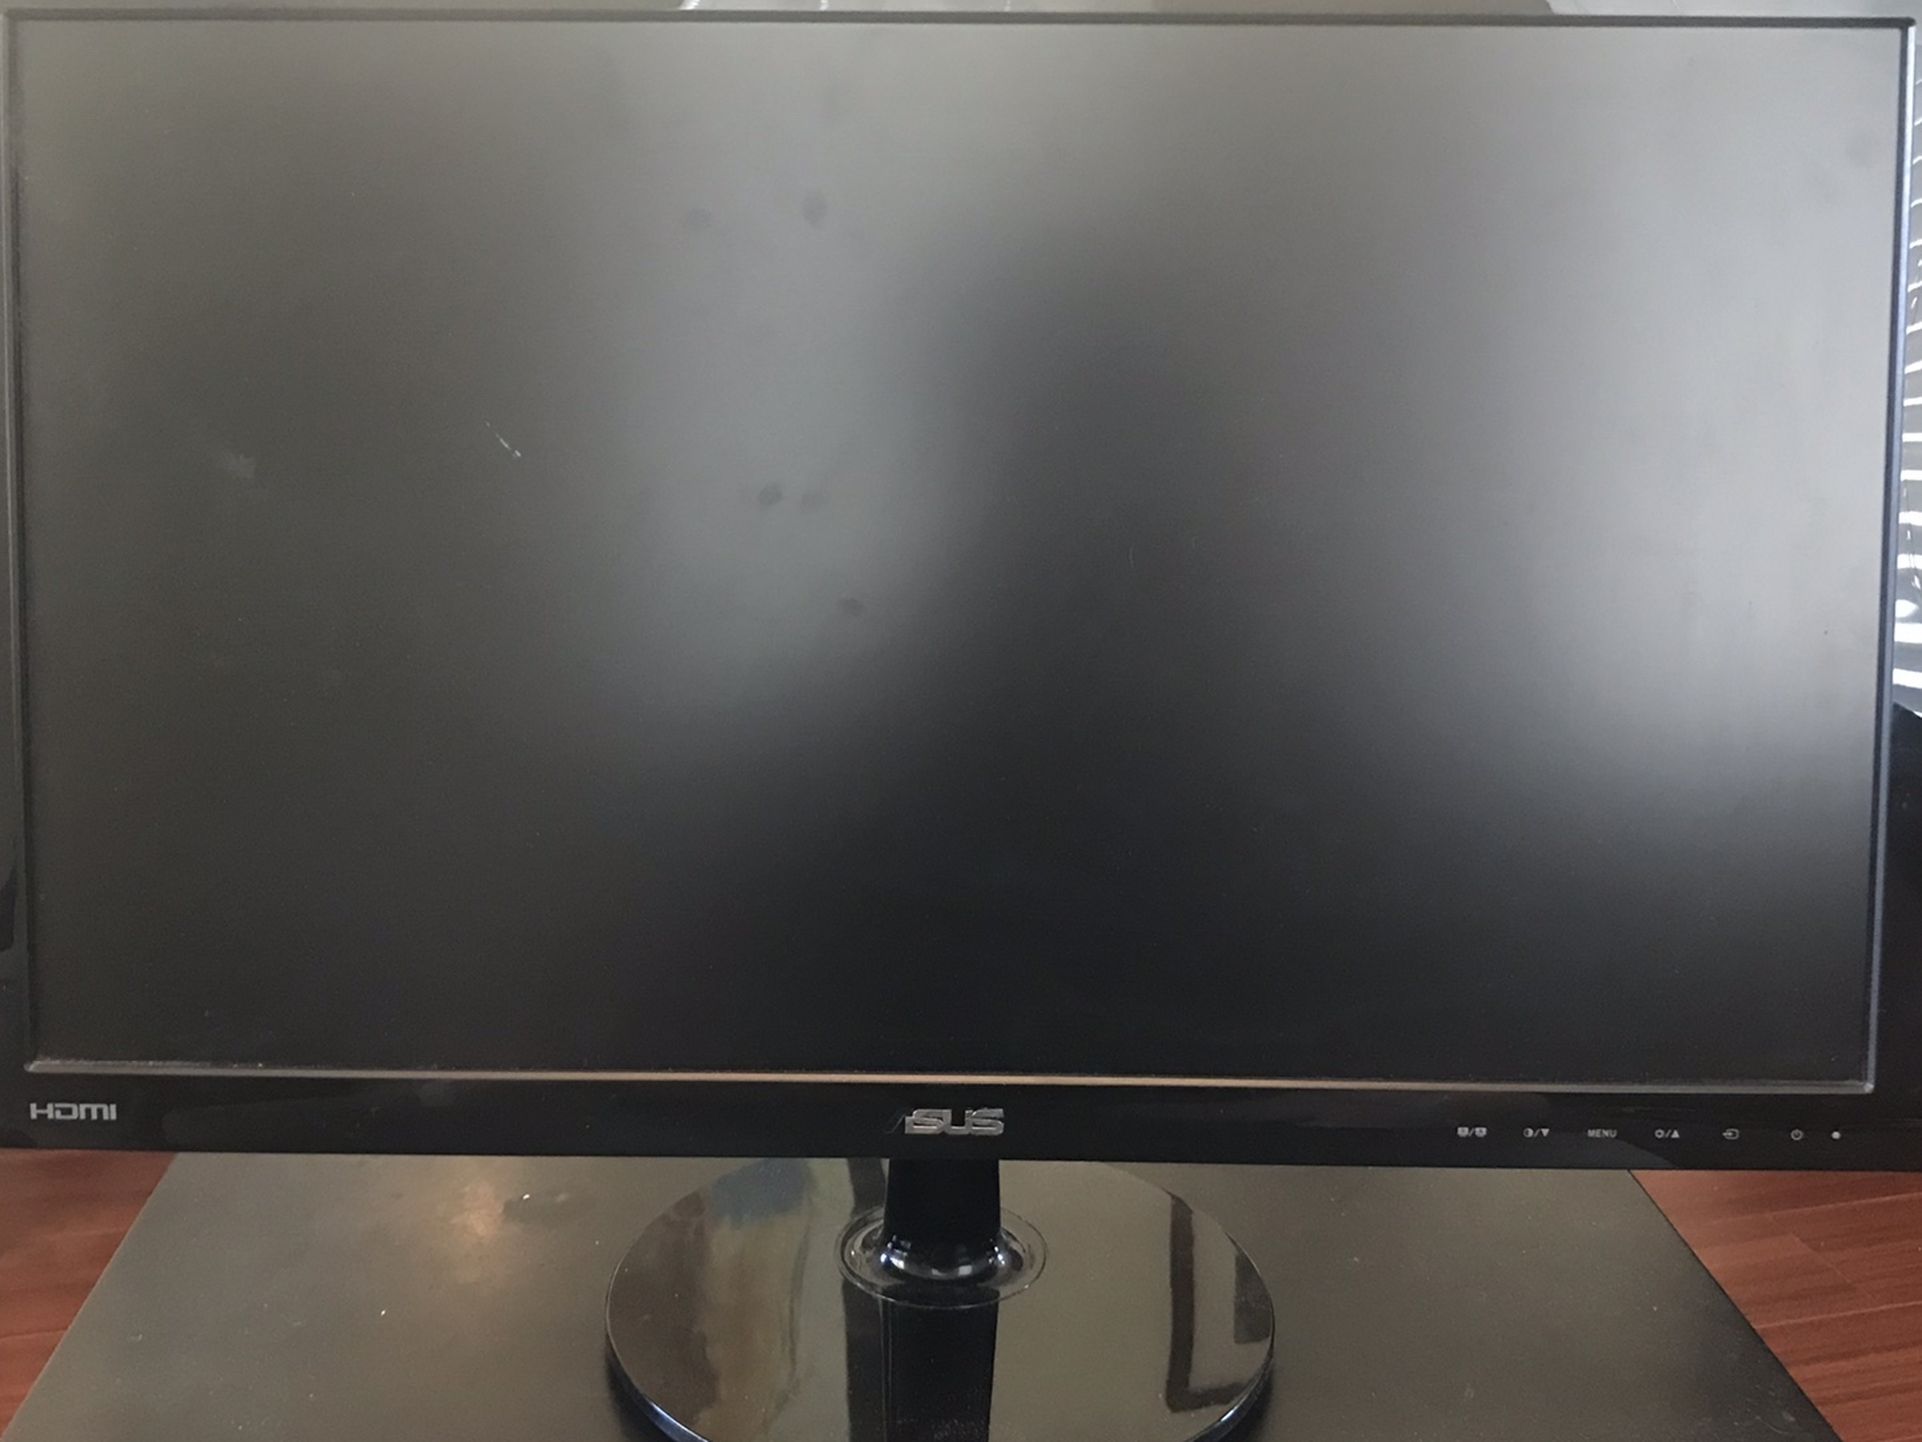 ASUS VS238H-P 23" HD computer monitor (HDMI not working)